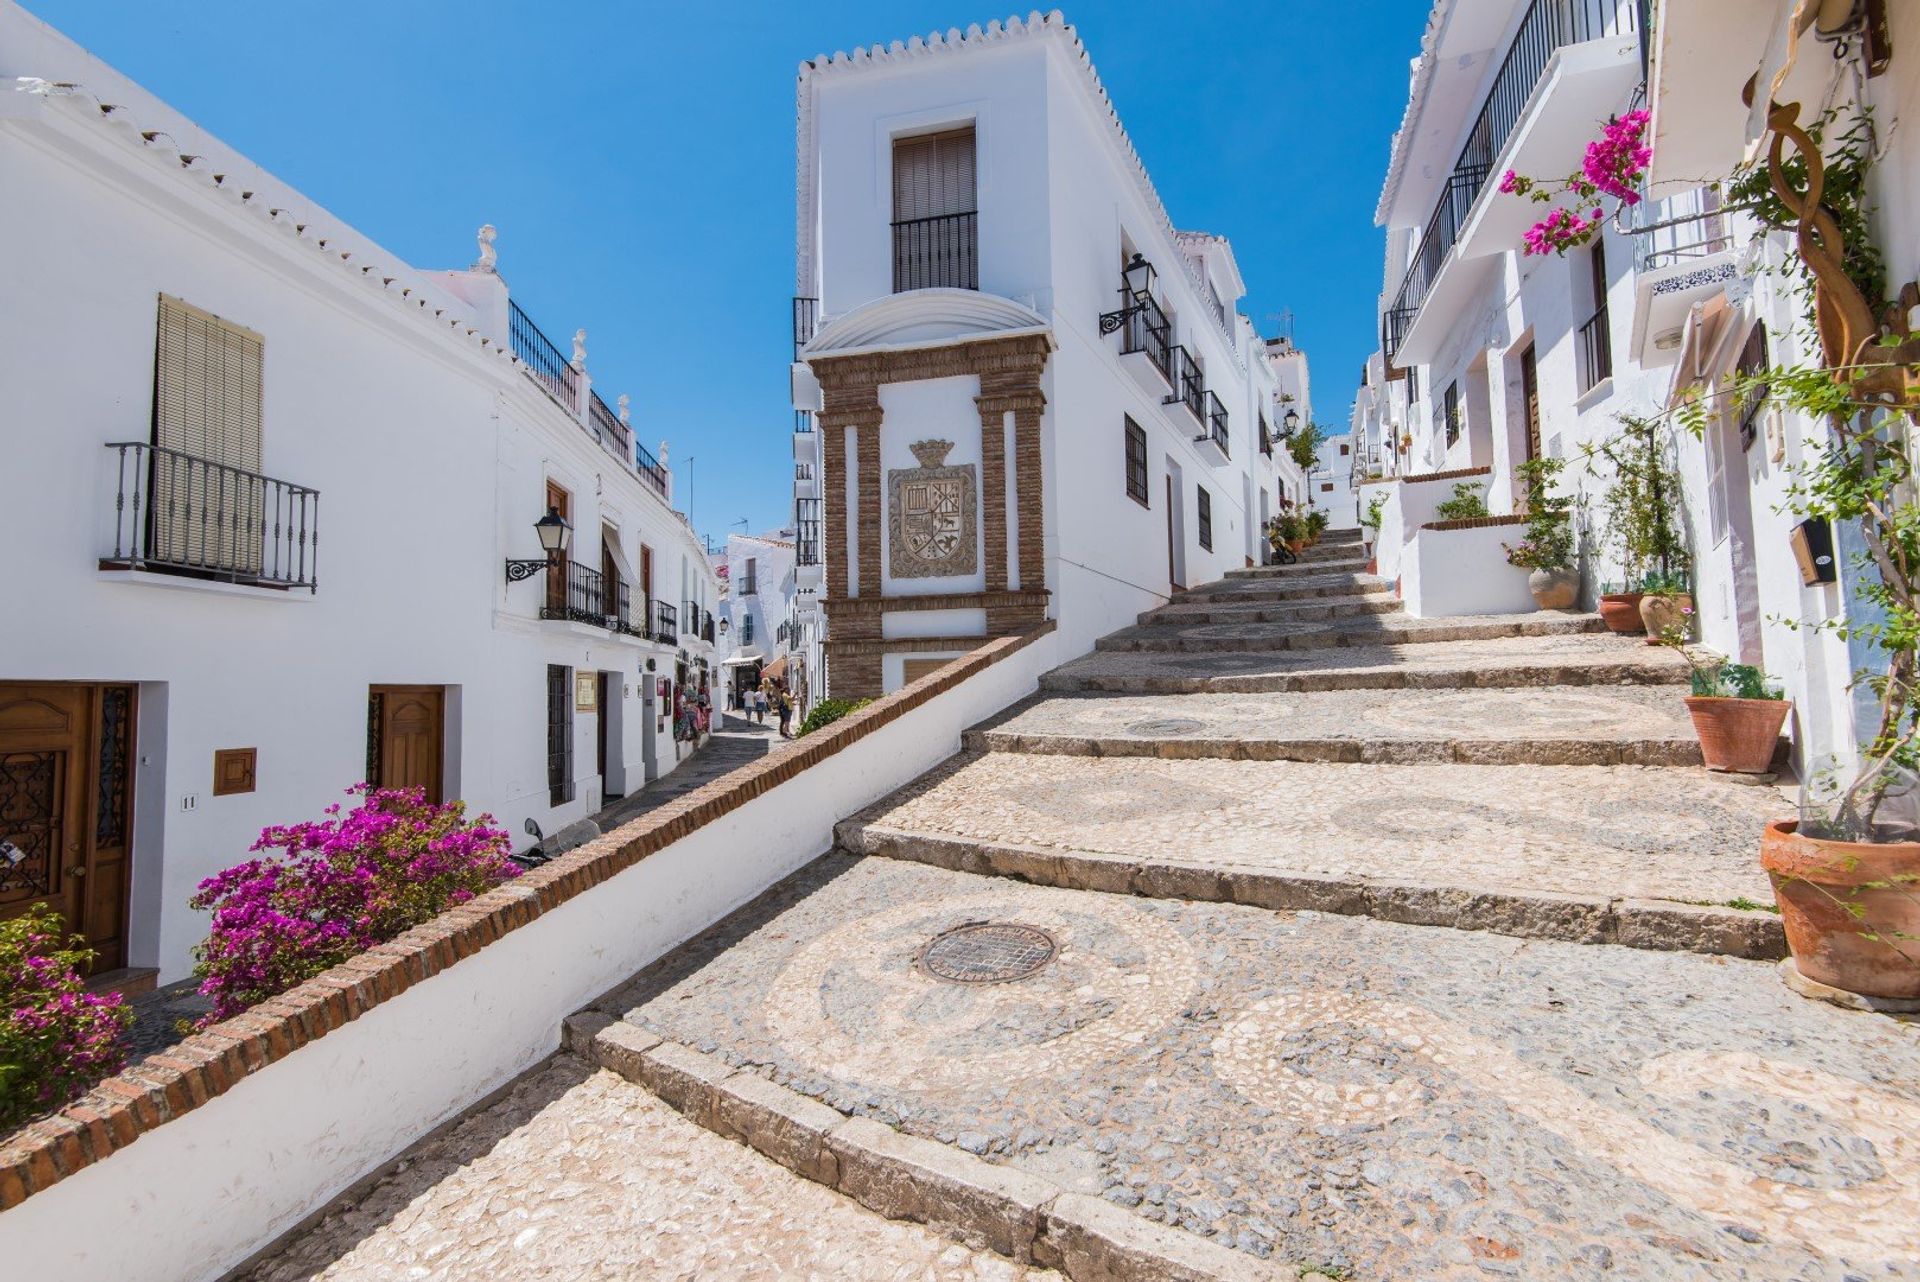 Discover Frigiliana's rich history with a stroll around the winding streets of the old Moorish quarter